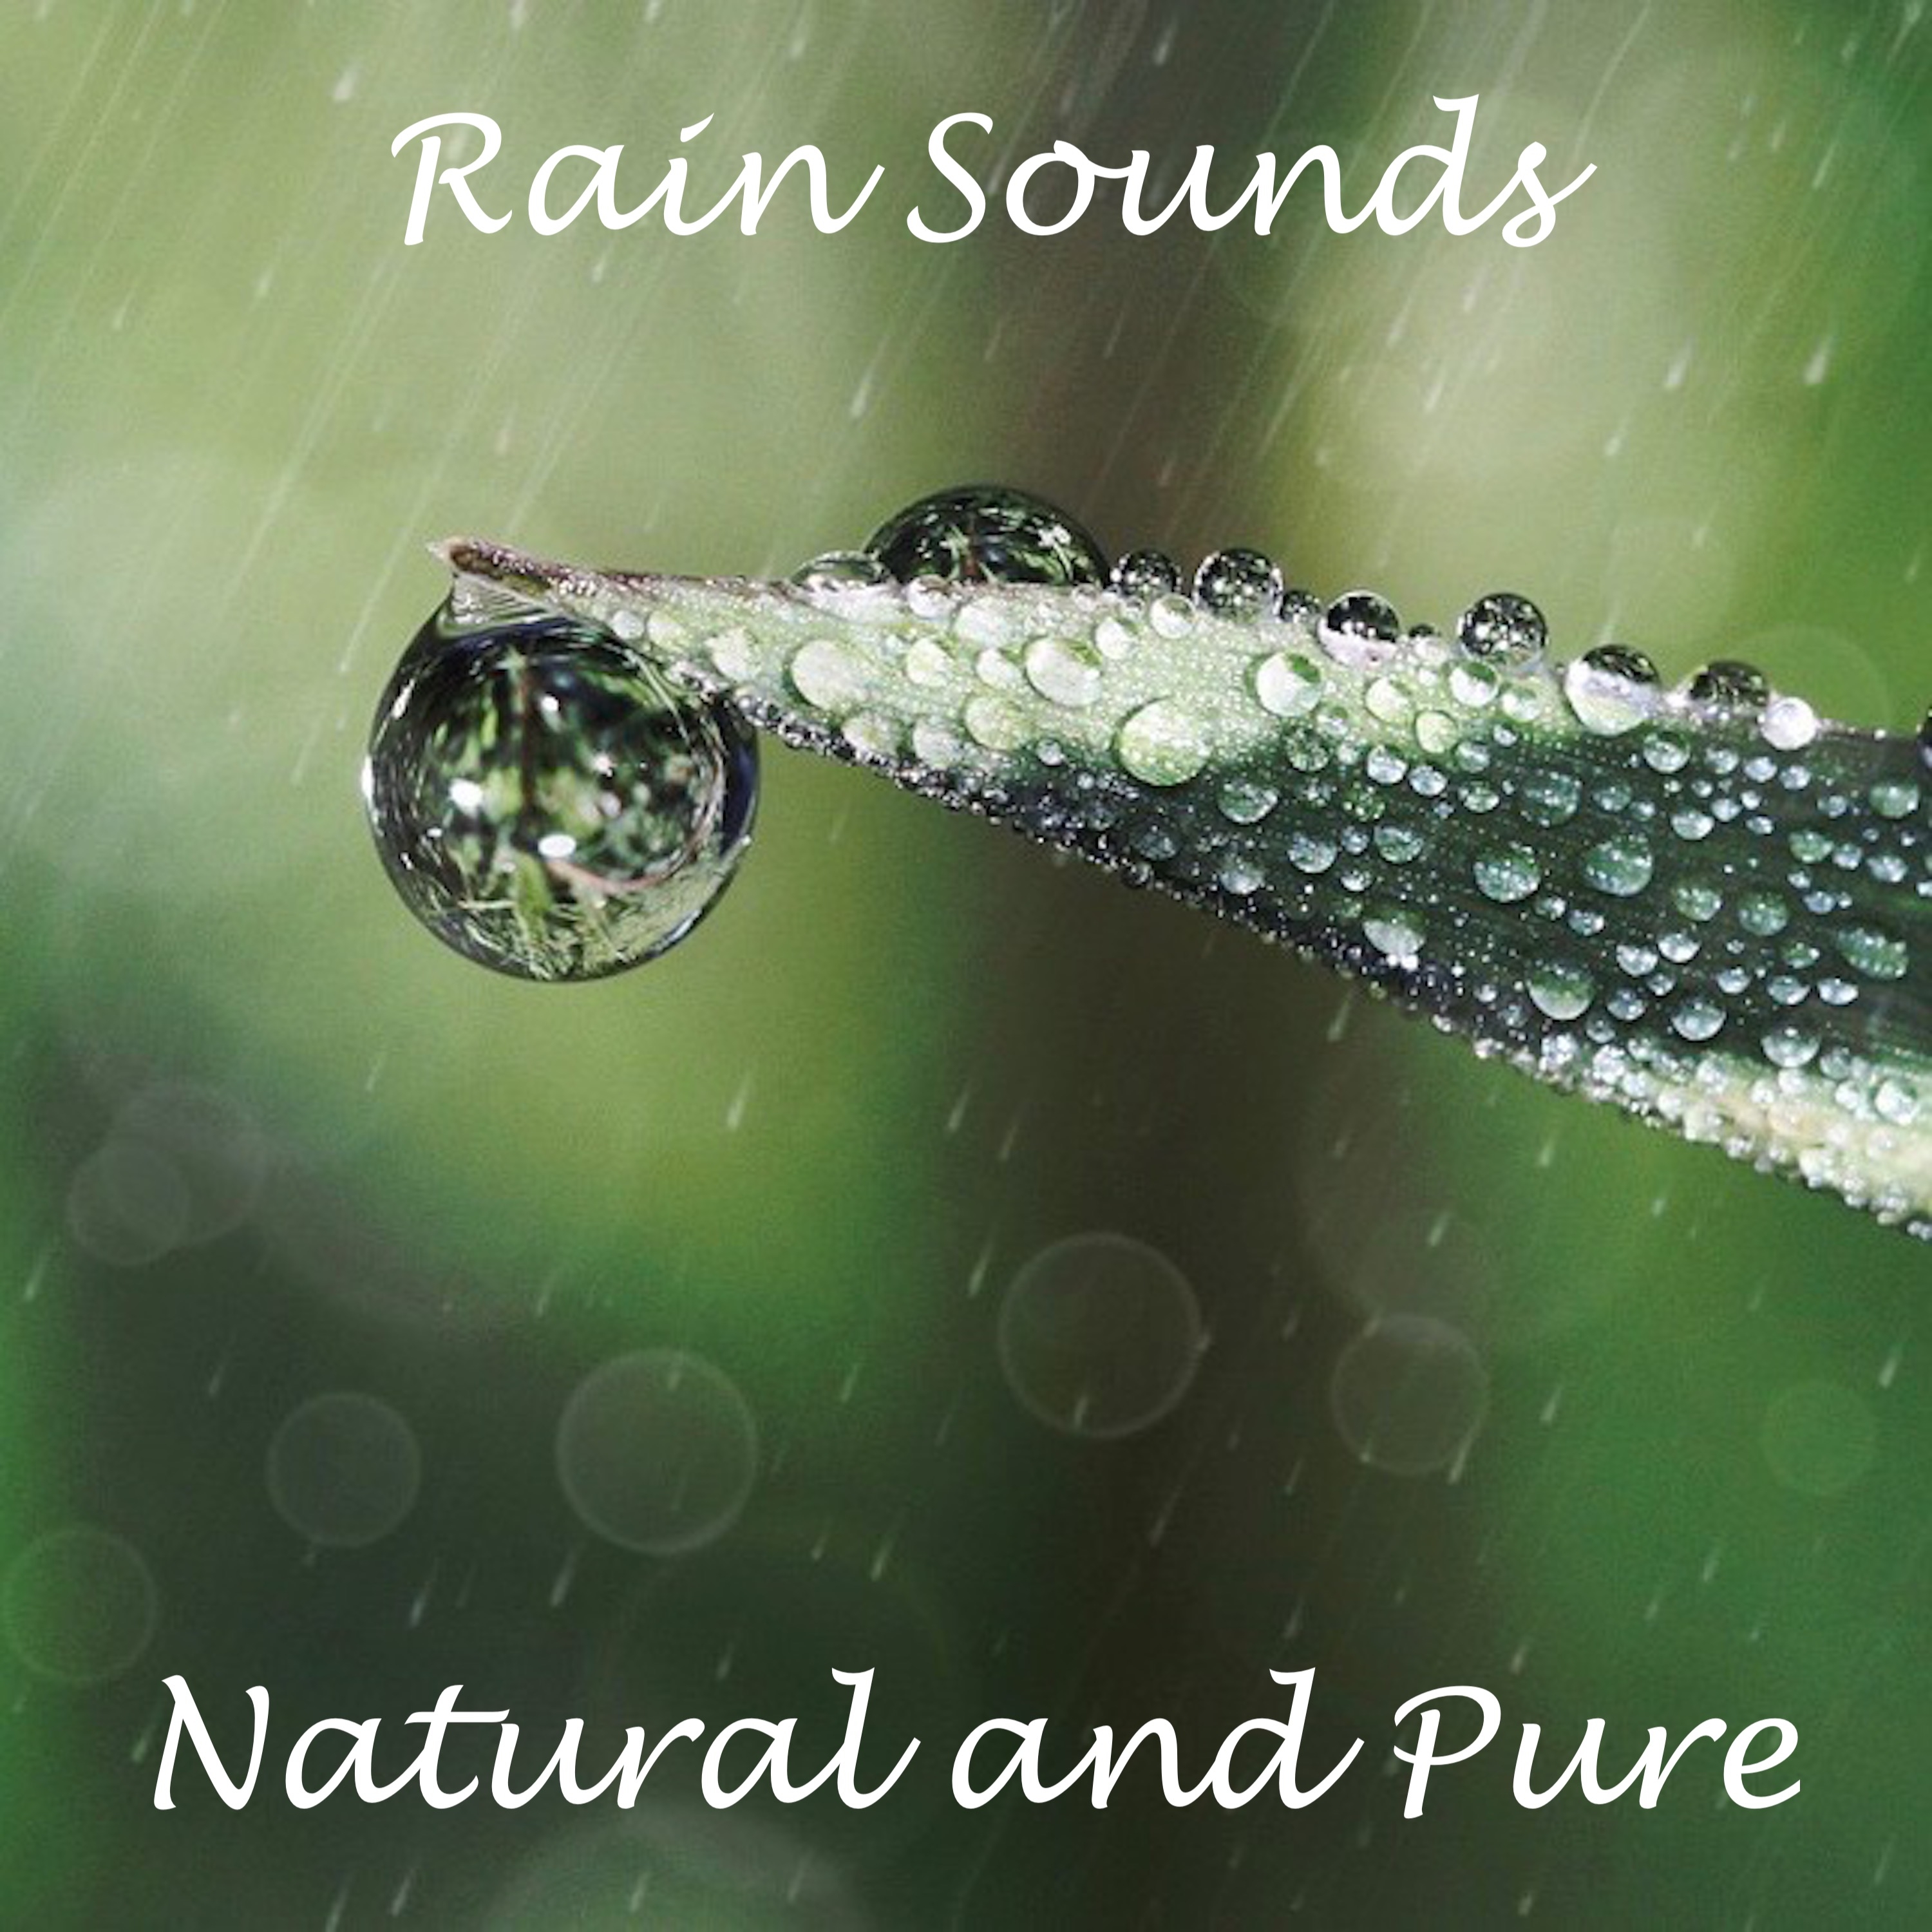 18 All Relaxing Rain and Nature Sounds: Peace, Zen, Calm, Tinnitus Aid, White Noise, Anxiety